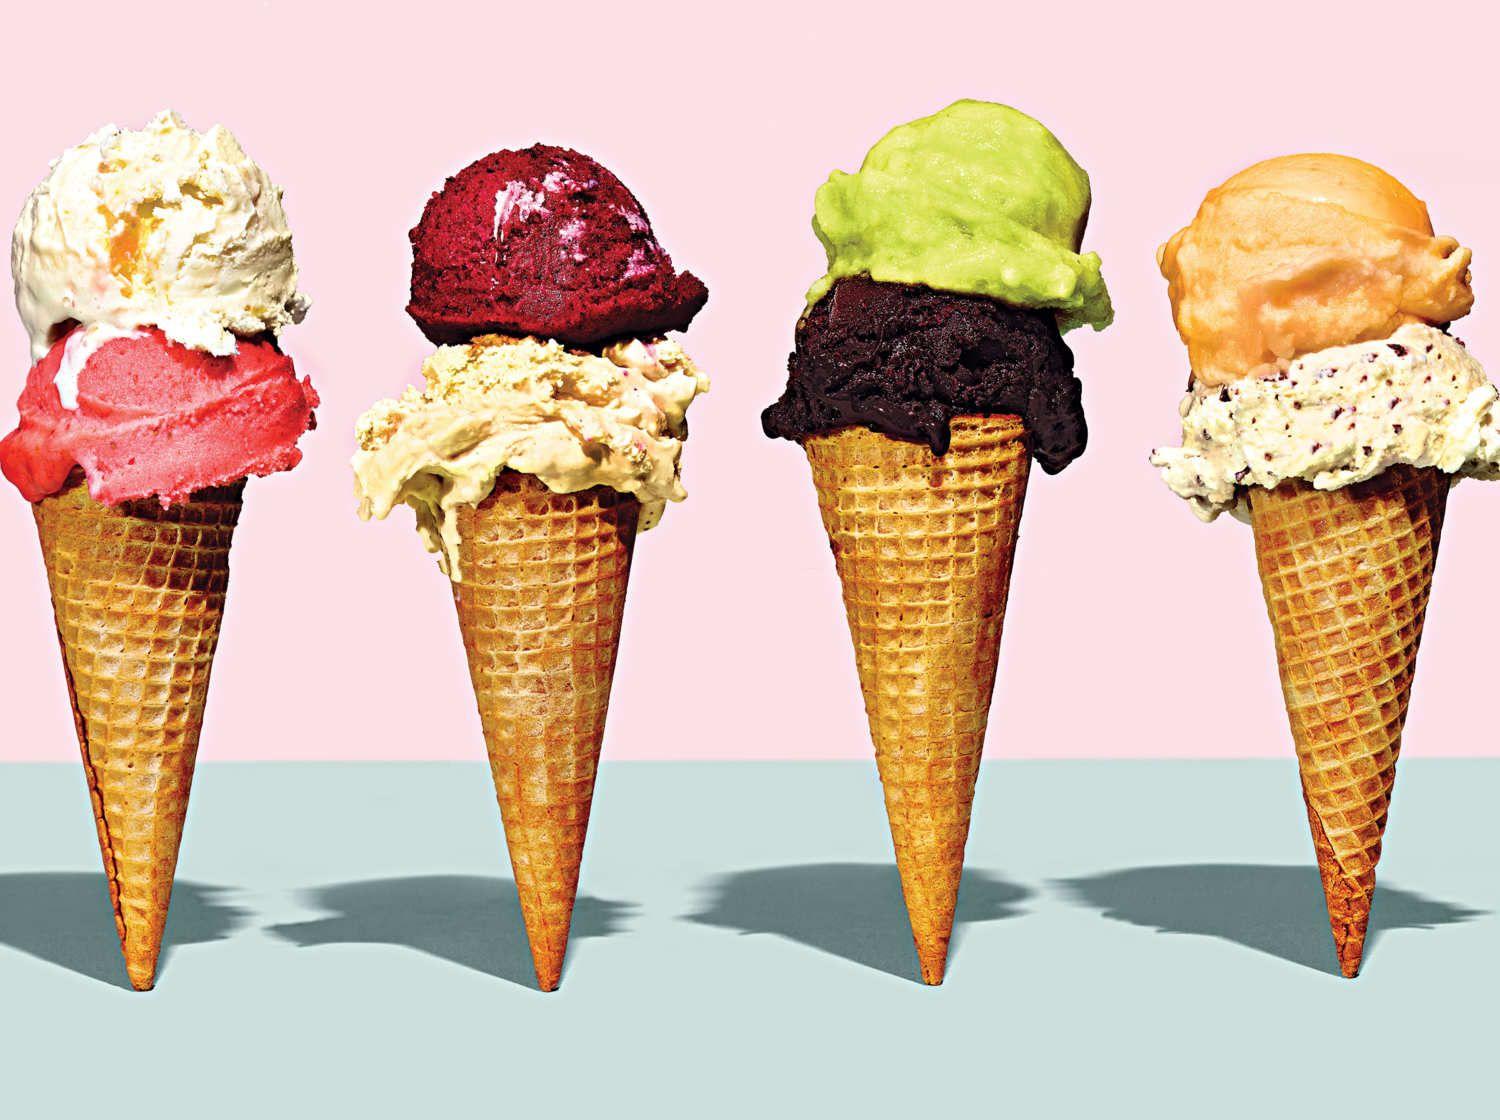 Top HDQ Ice Cream Image for desktop and mobile